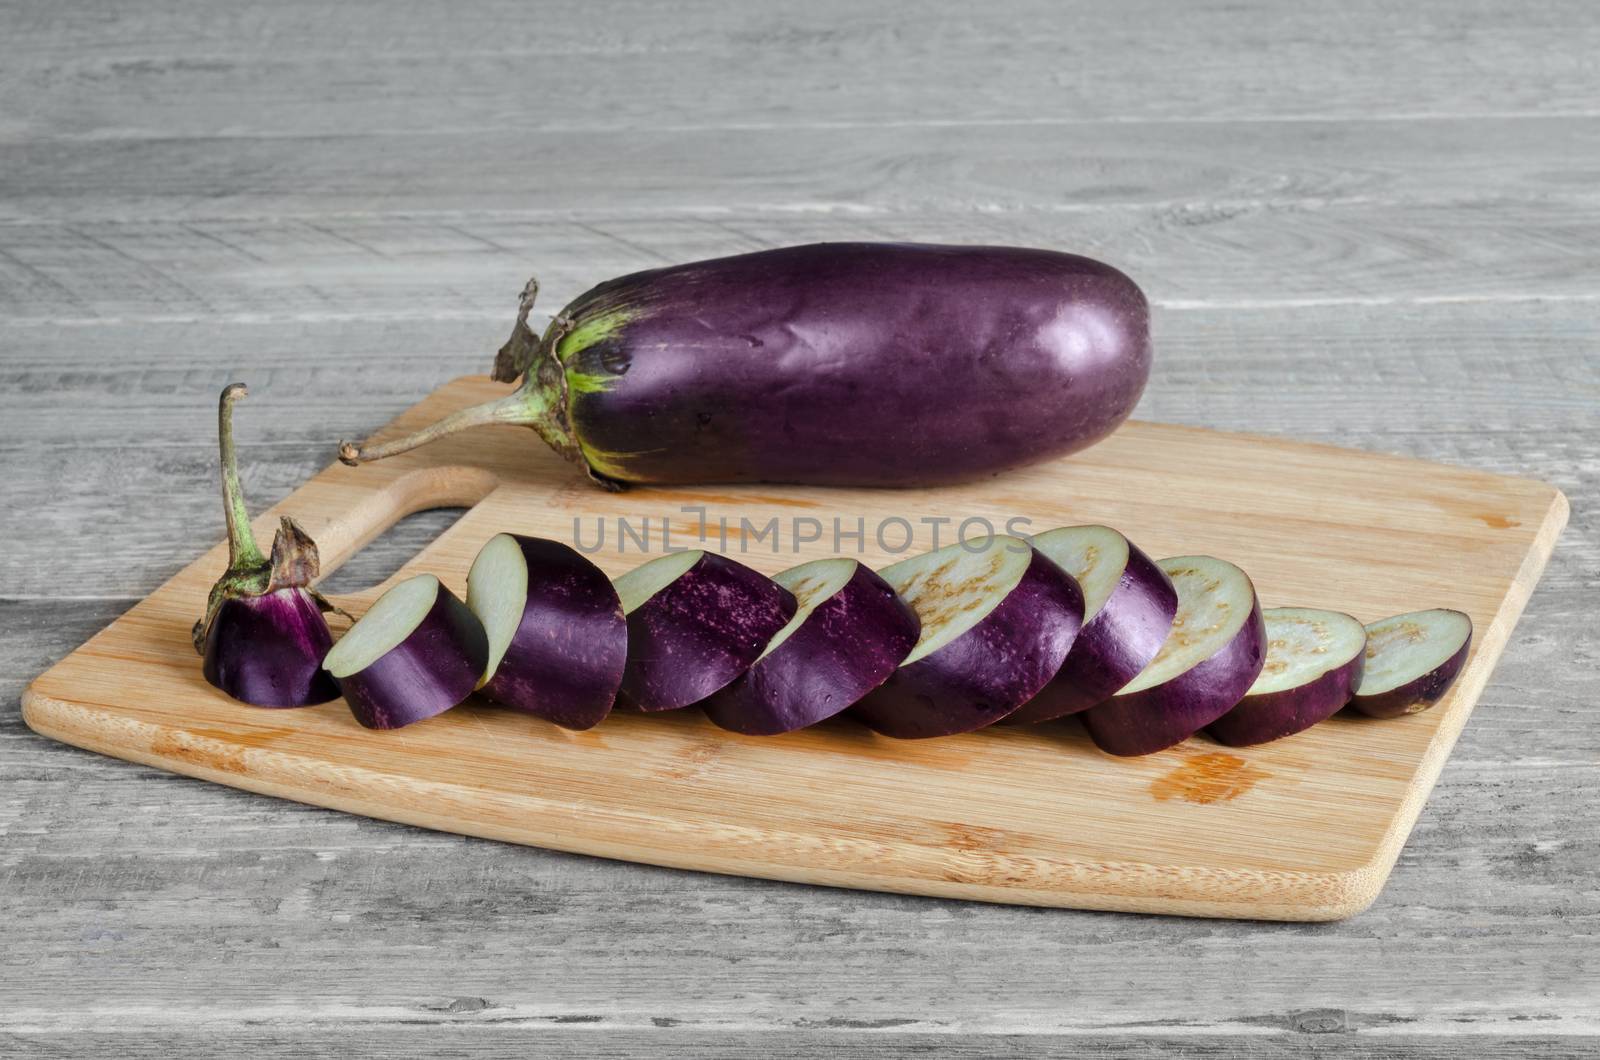 Eggplant lay on a cutting Board, on a gray wooden background.